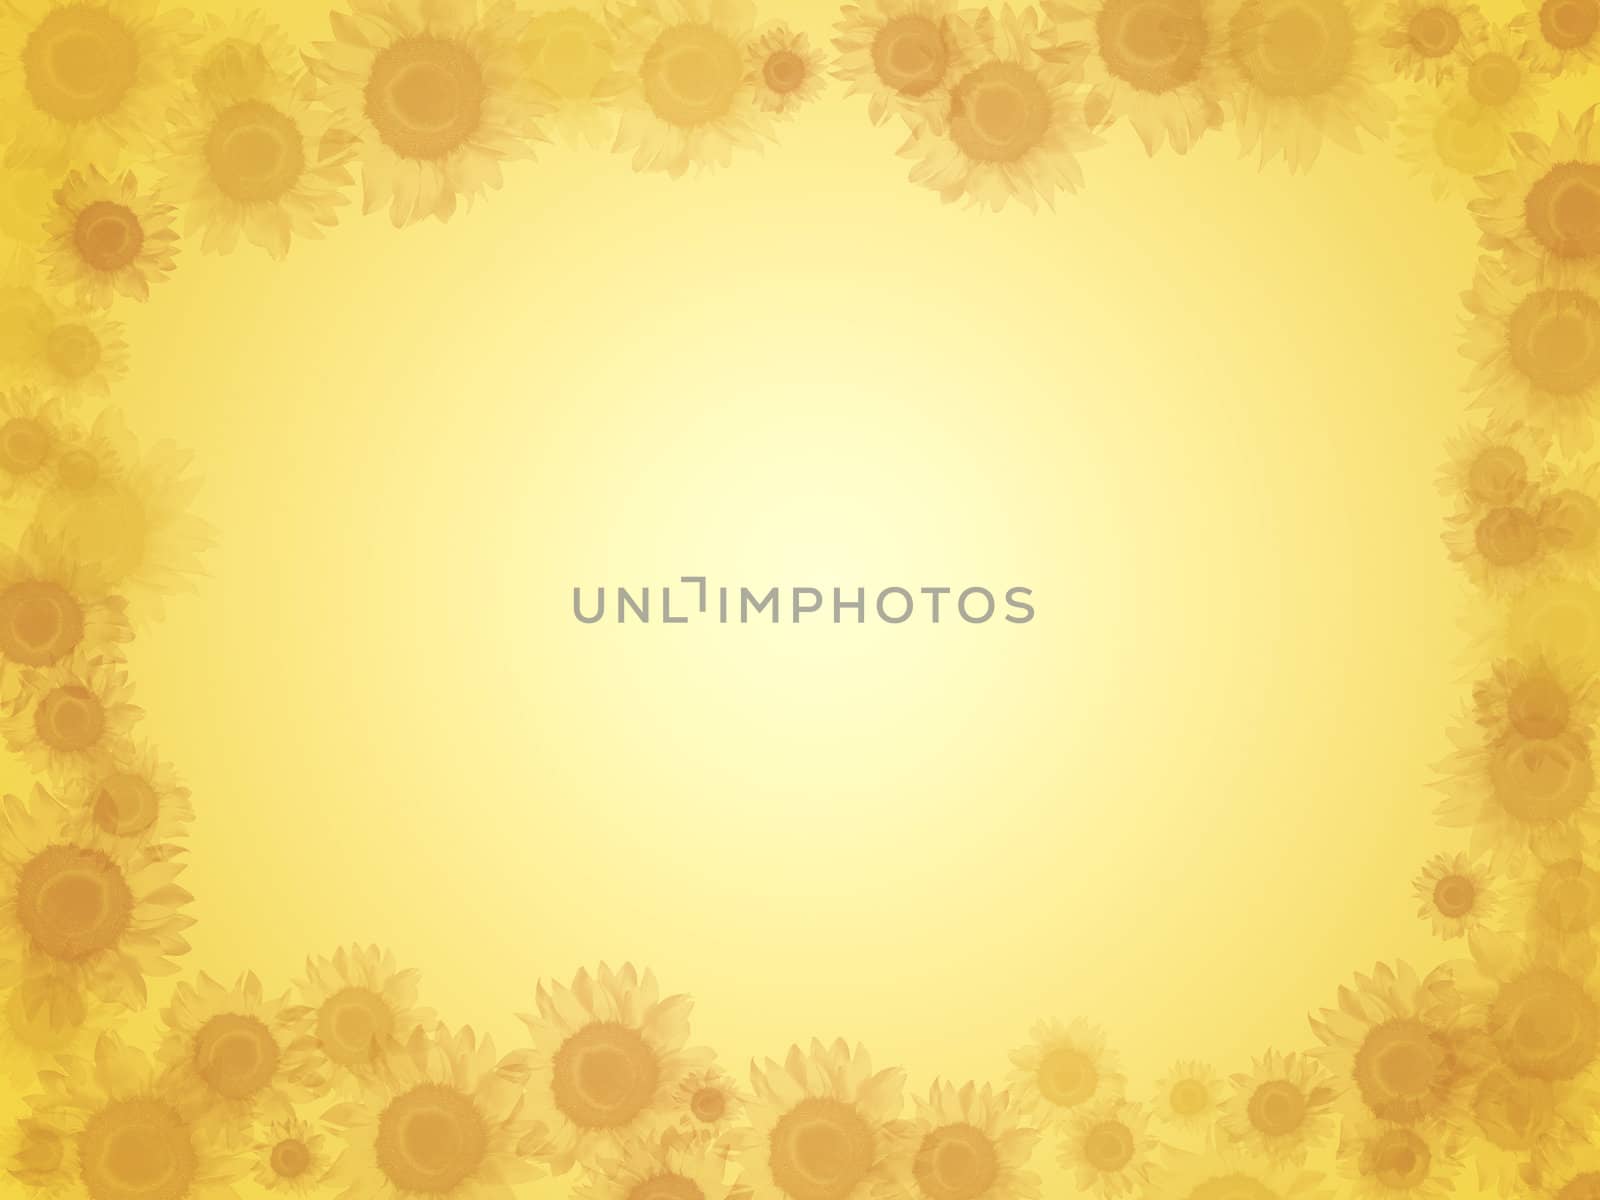 Background with sunflowers by tuku